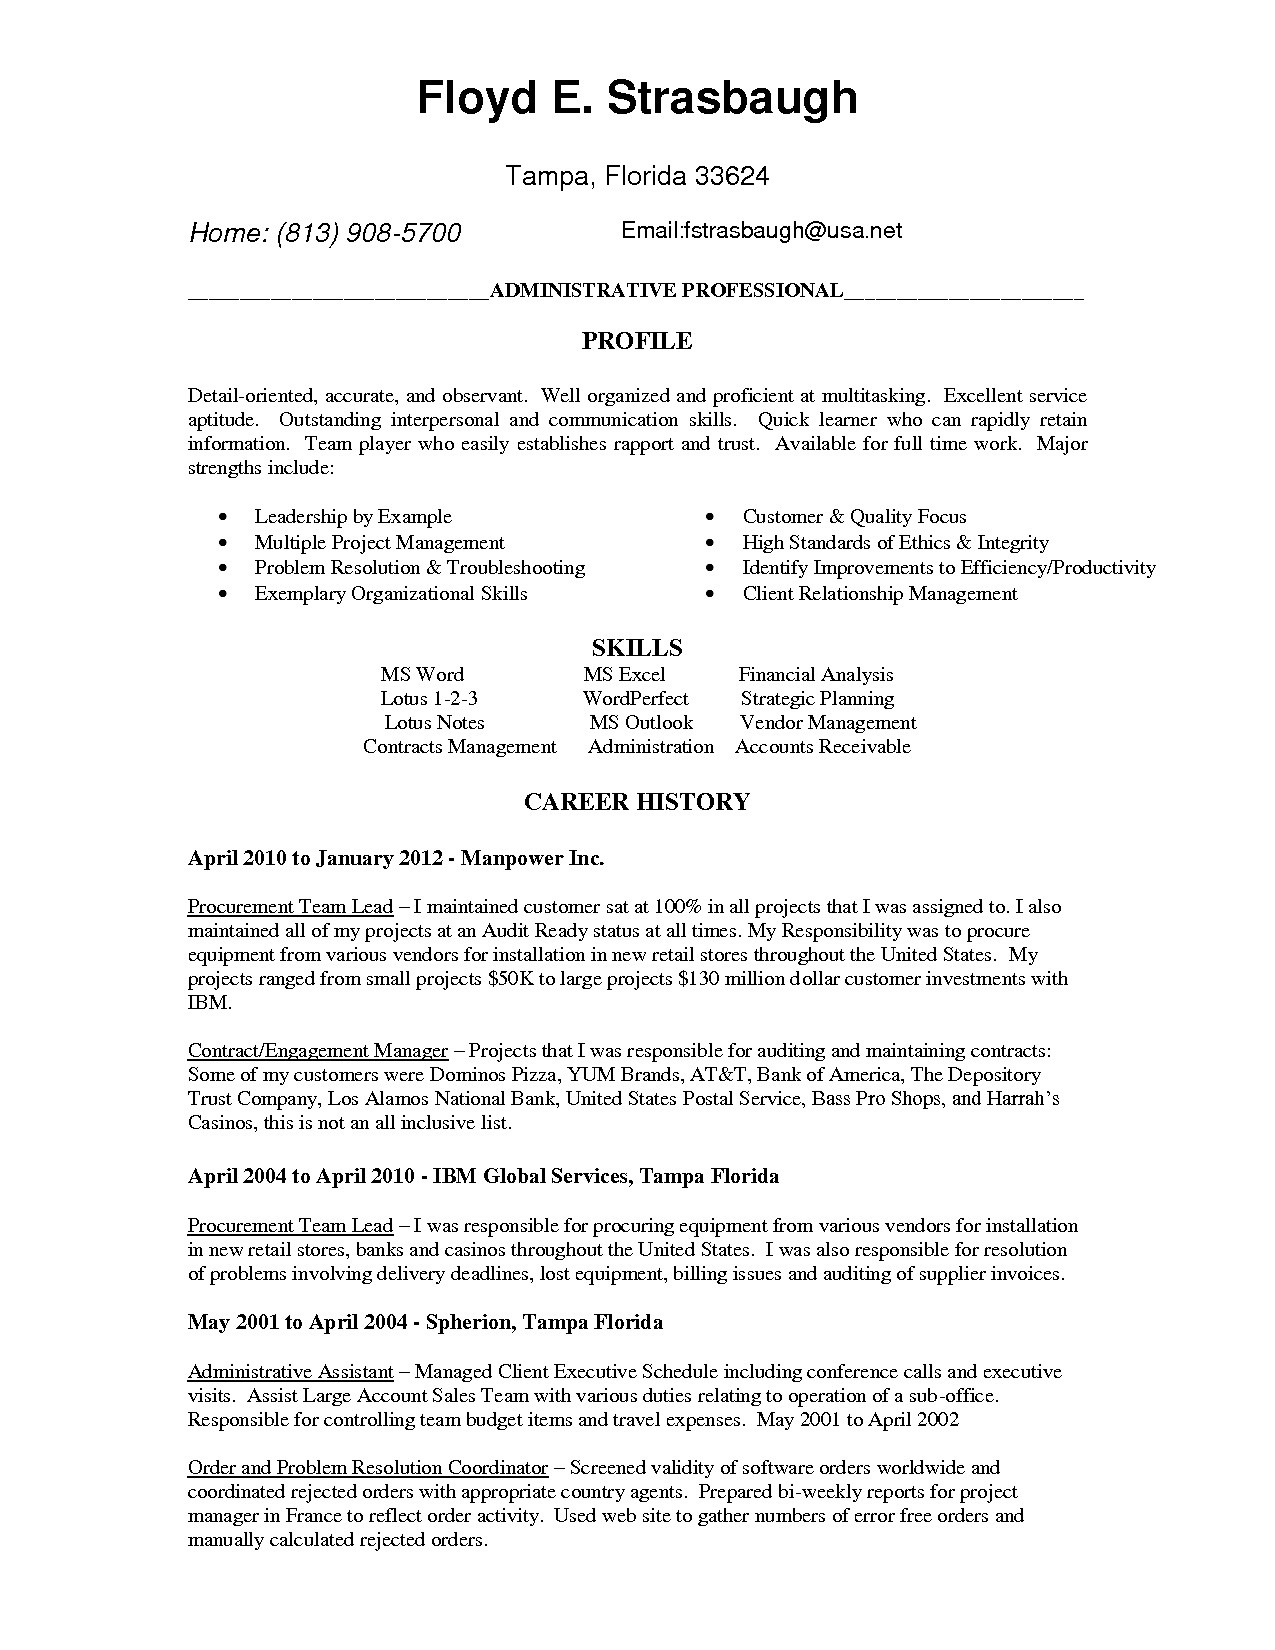 Business Presentation Letter Template - Corporate Credit Analysis Template New Business Cover Letter